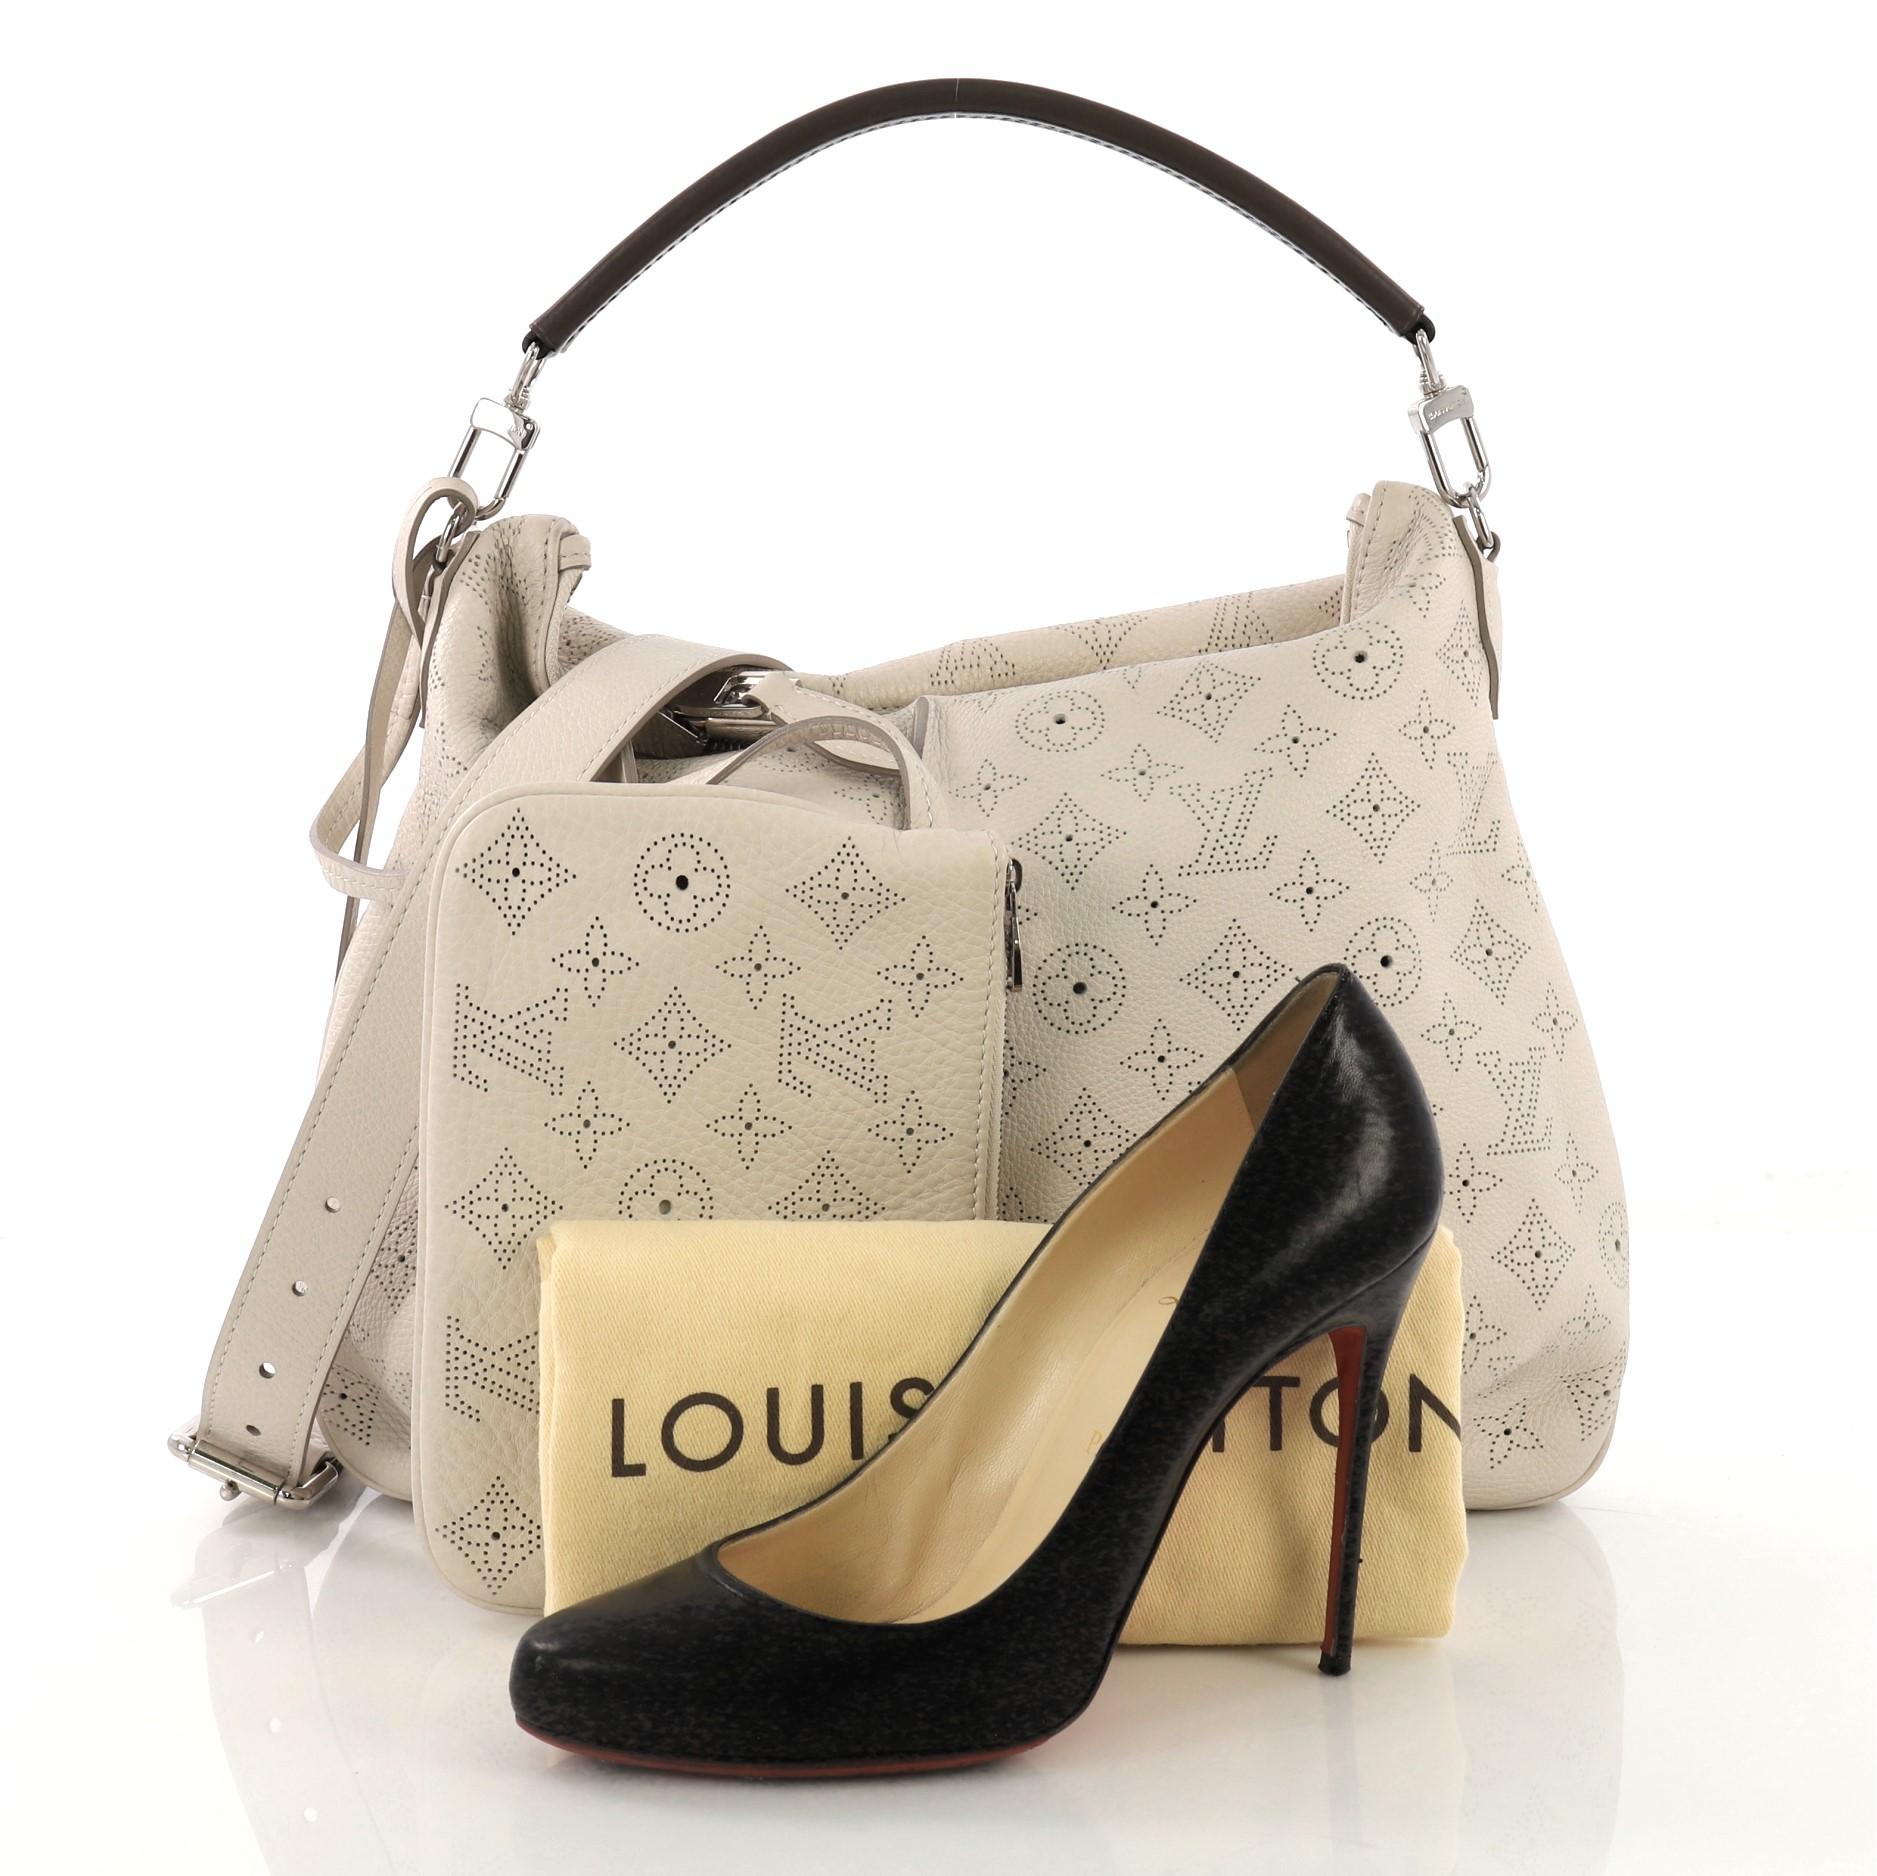 This Louis Vuitton Selene Handbag Mahina Leather PM, crafted in gray monogram perforated mahina leather, features a single loop leather handle, pleated detailing, and silver-tone hardware. Its top zip closure opens to a gray microfiber interior with